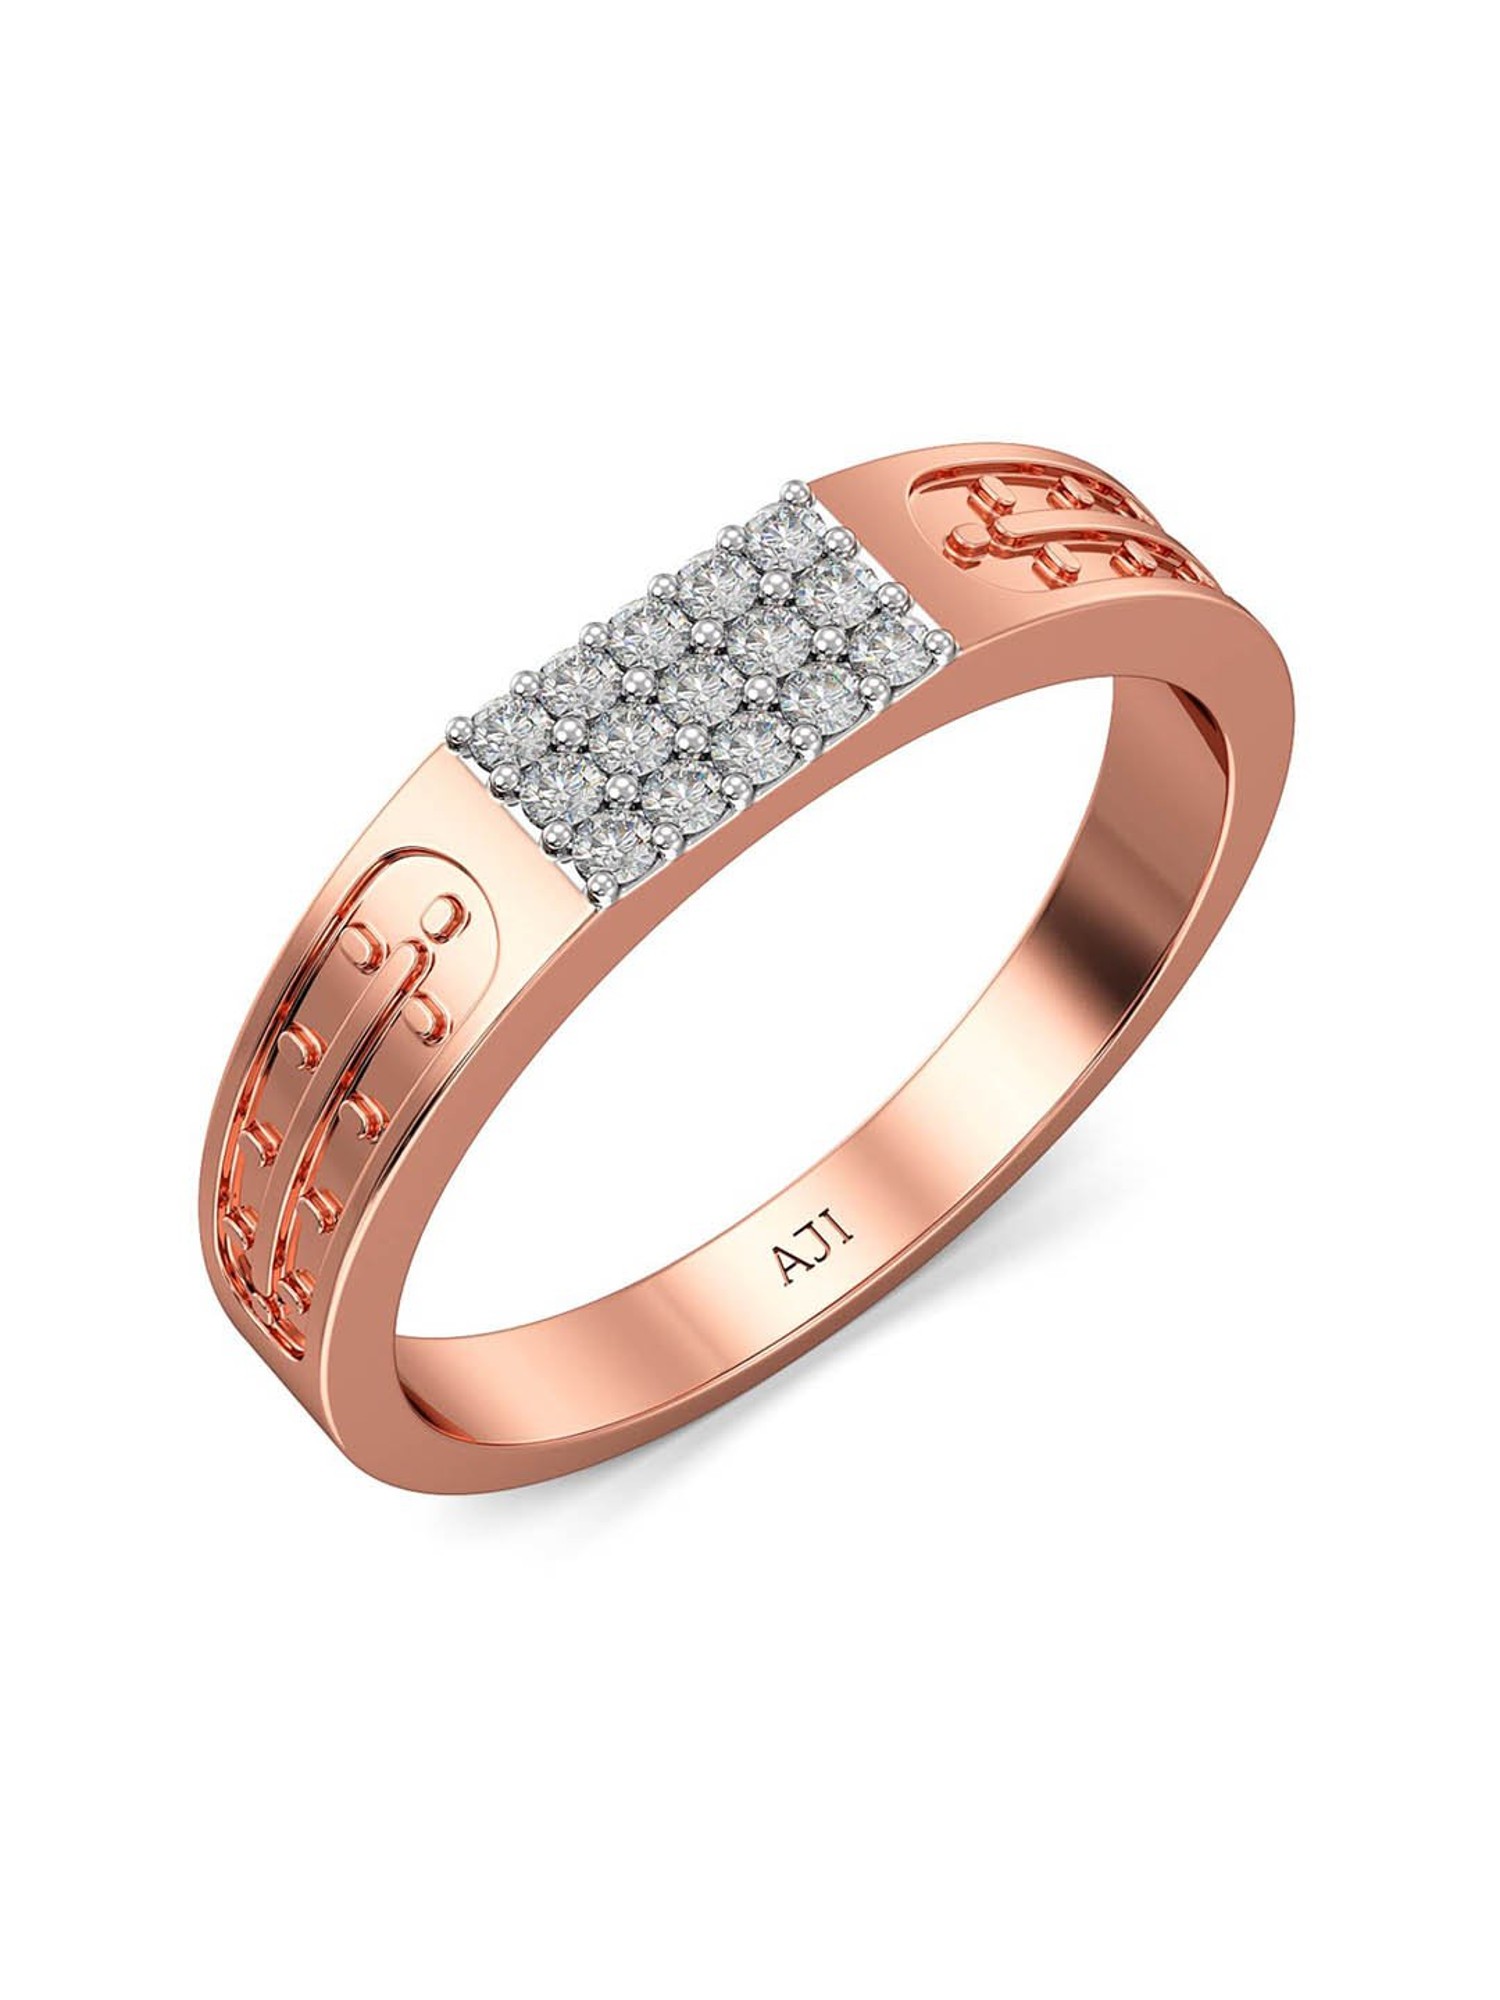 Men's Engagement Rose Gold Natural Diamond Ring, Size: Free Size in Durg at  best price by Pradeep Jewellers - Justdial